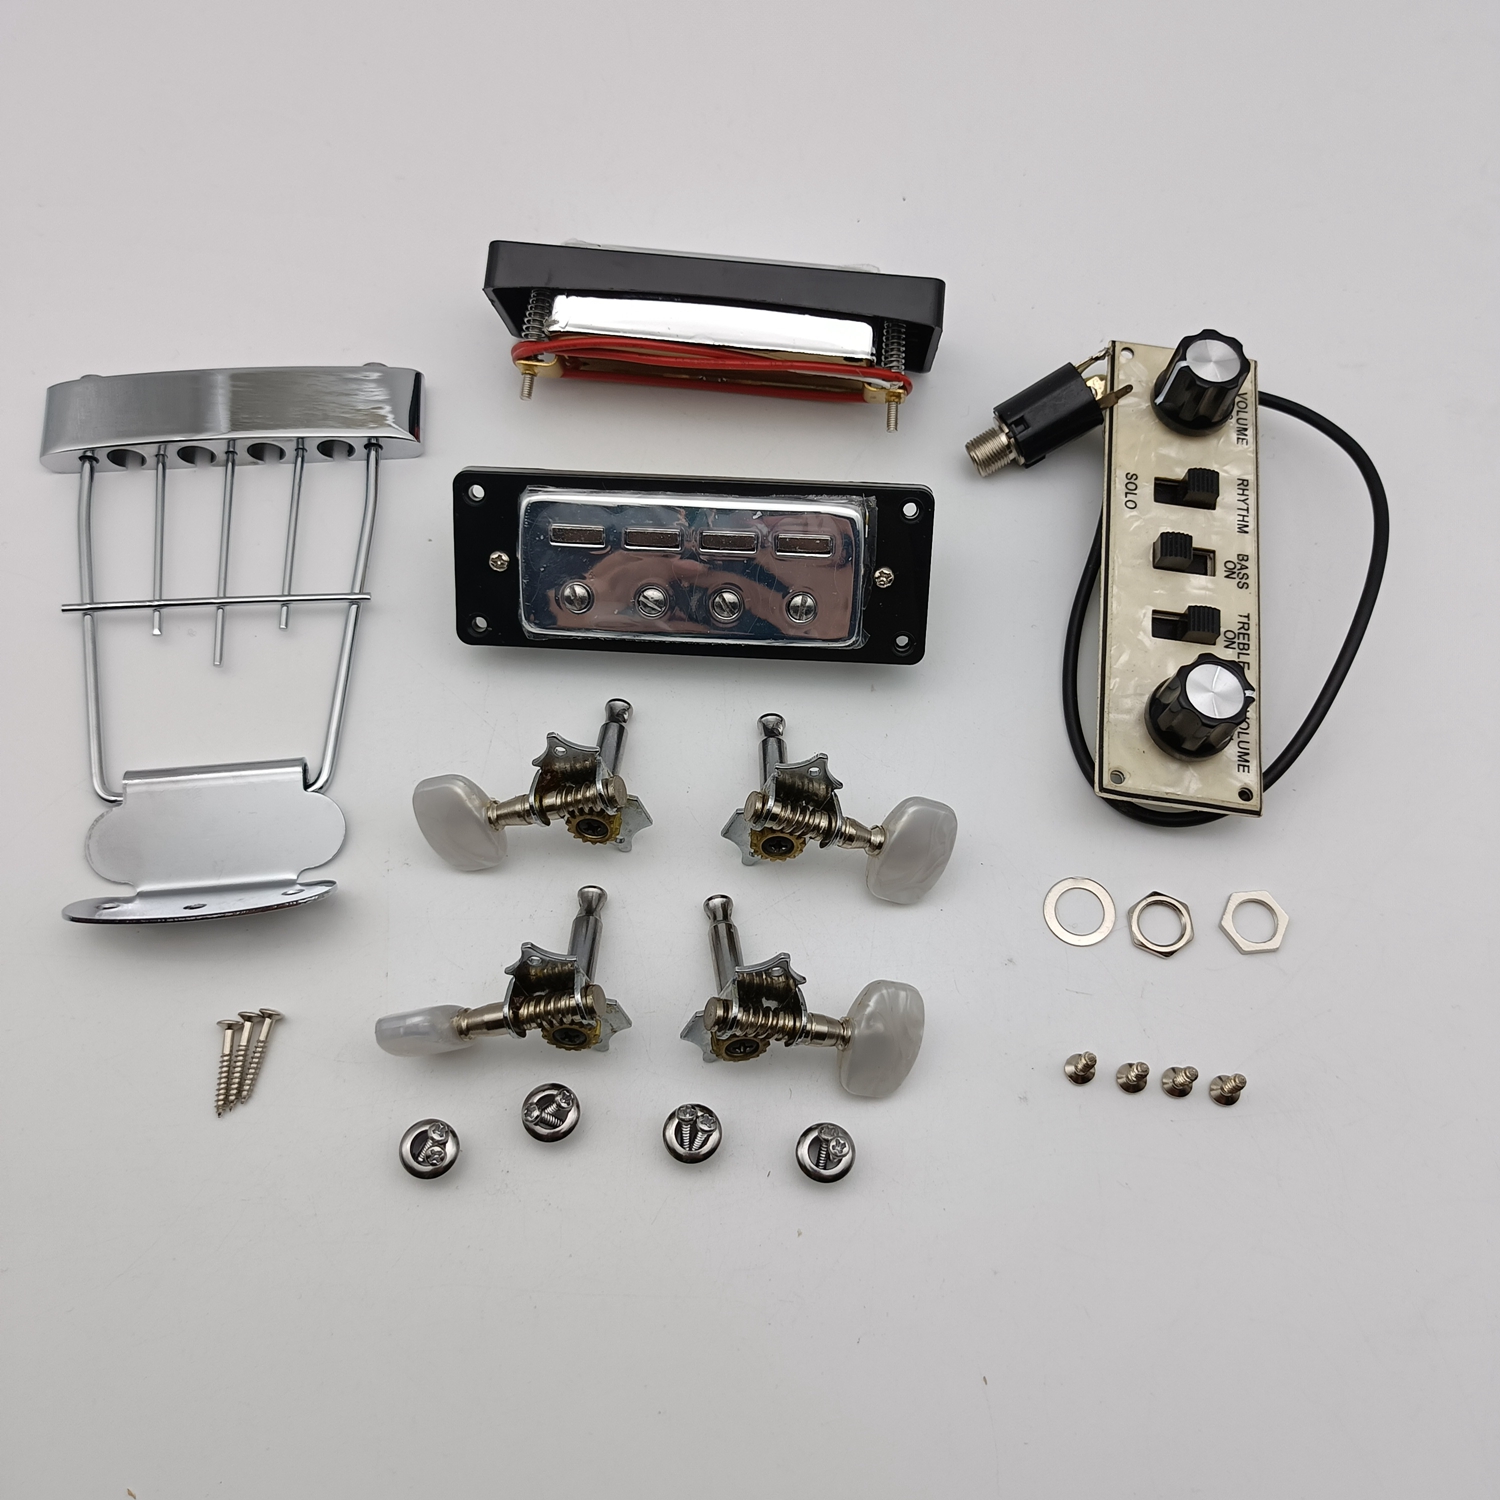 4 String Hofner Electric Bass Kits Tuners + Pickups - Trapeze Tailpiece & Control Panel от DHgate WW